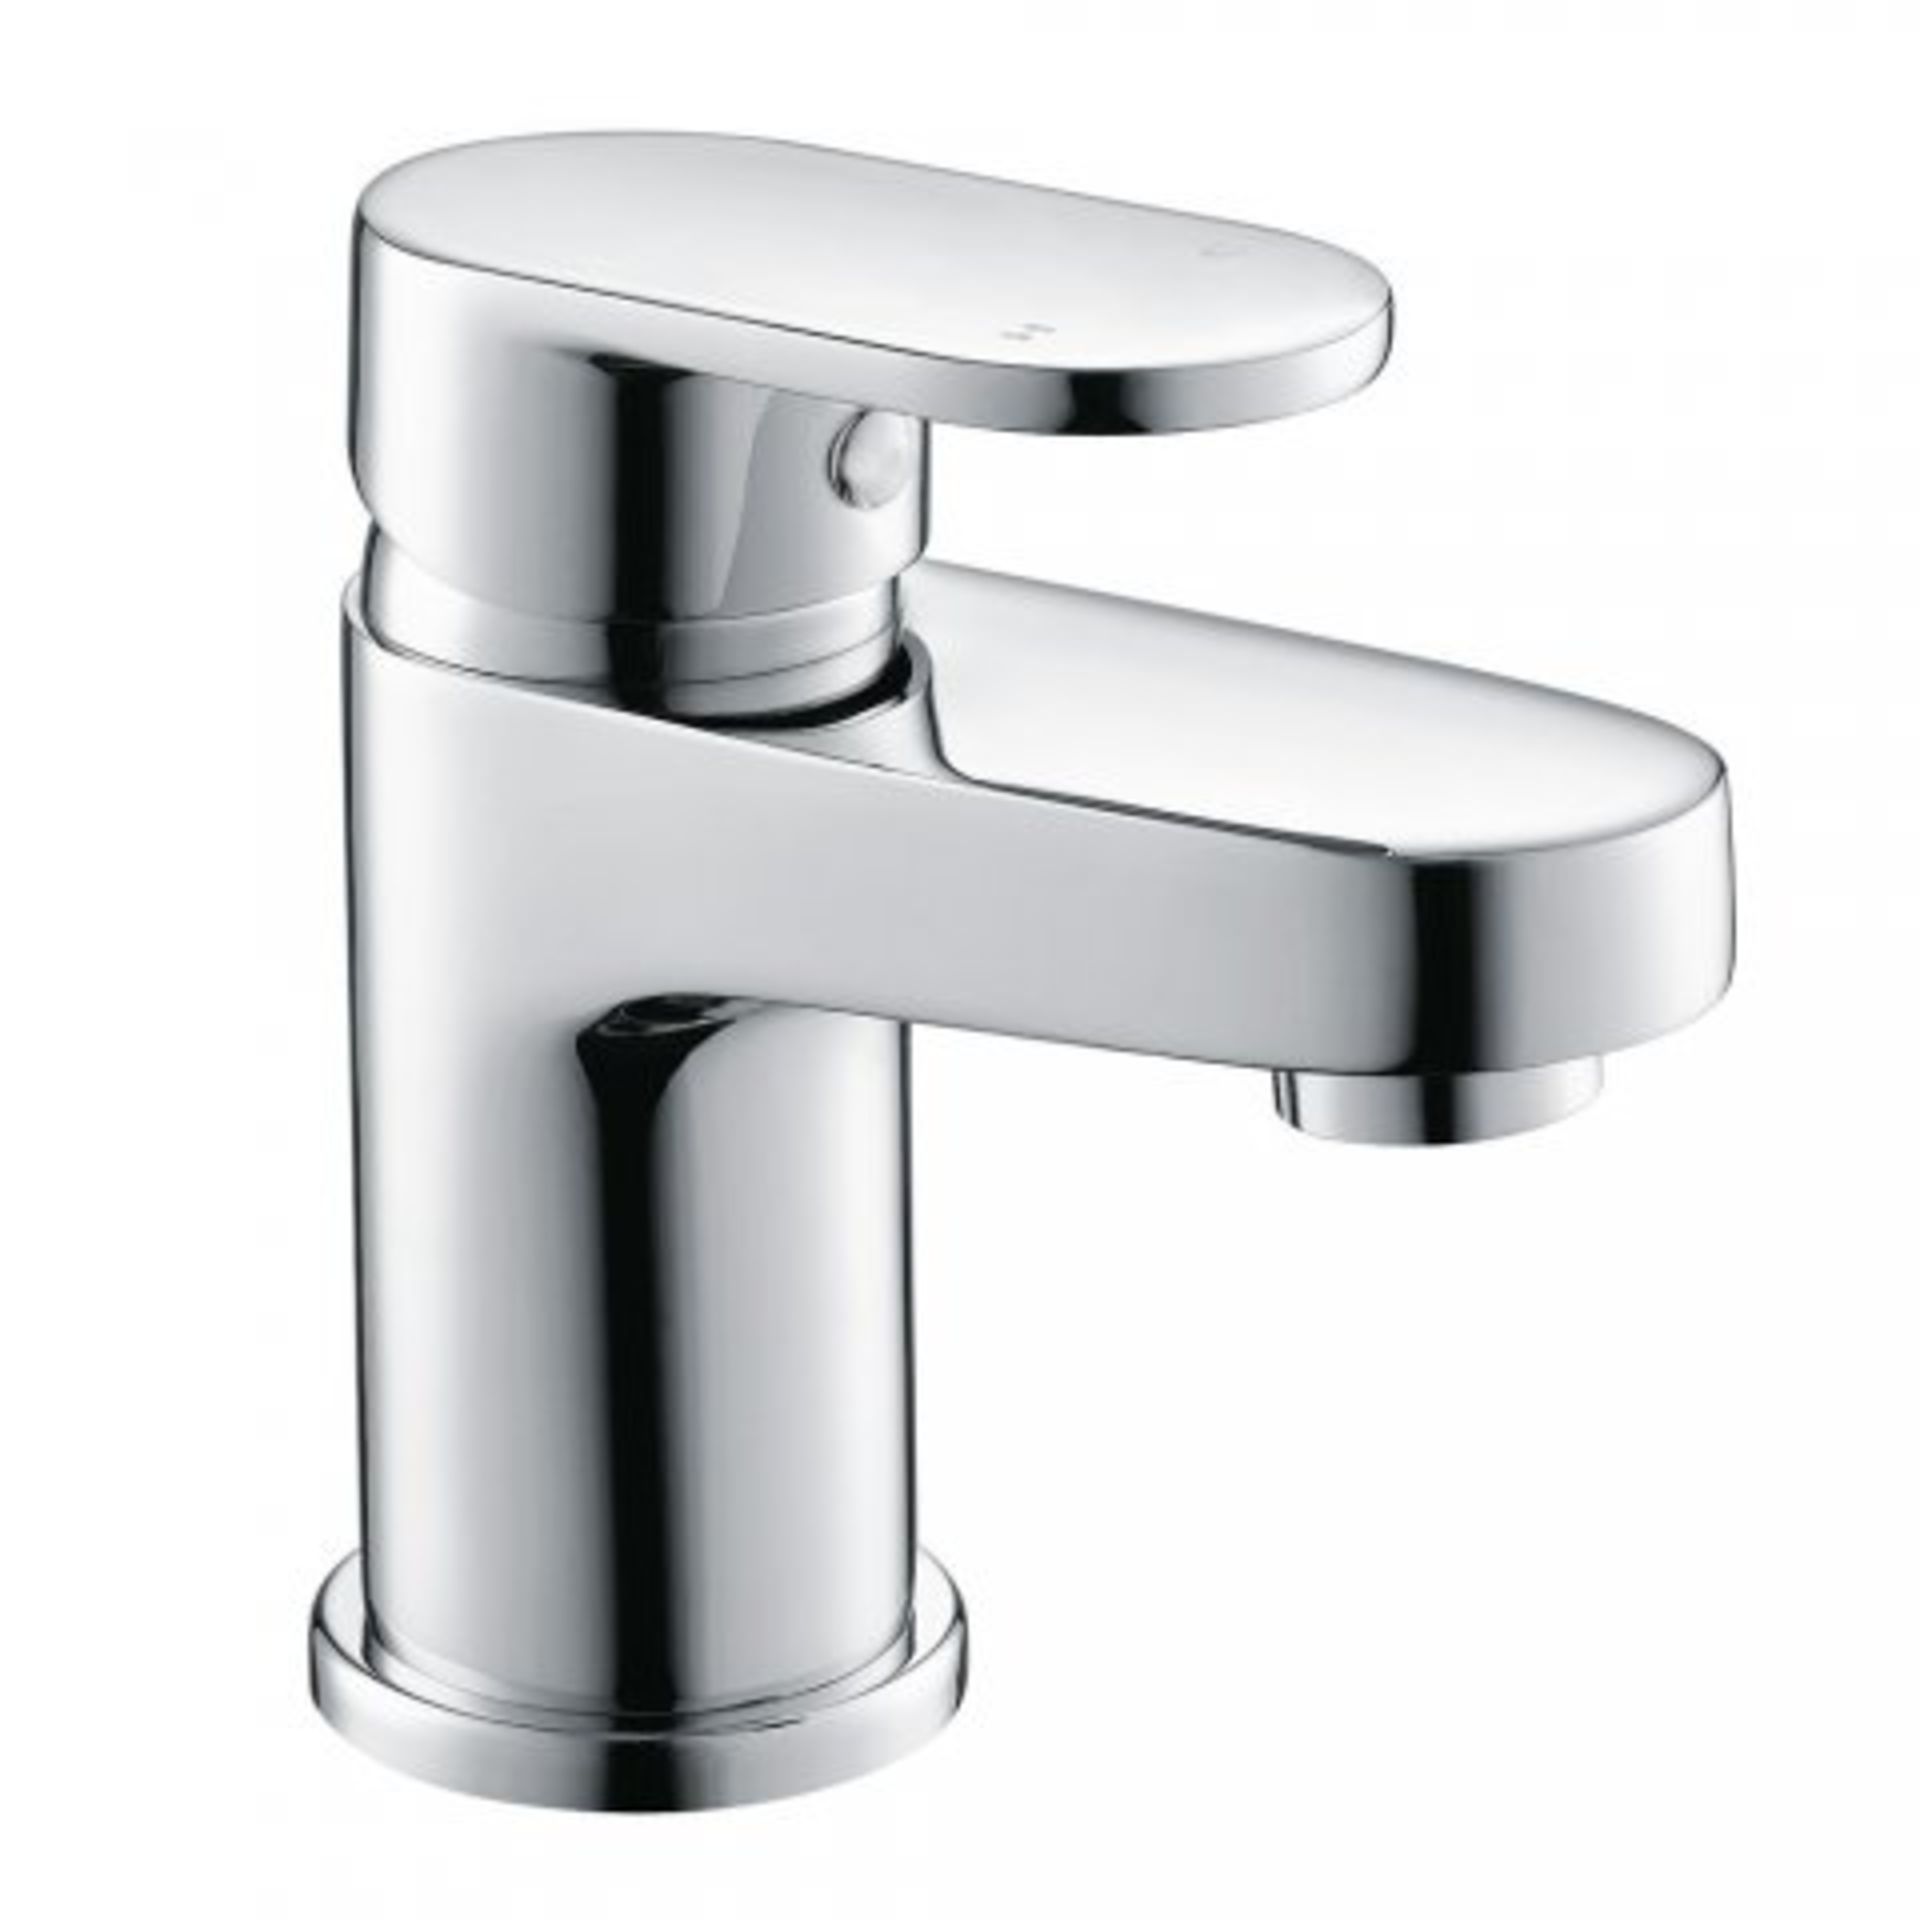 N36 -Boll Mono Basin Mixer Tap - Cloakroom. RRP £77.39. Presenting a contemporary design, this solid - Image 2 of 3